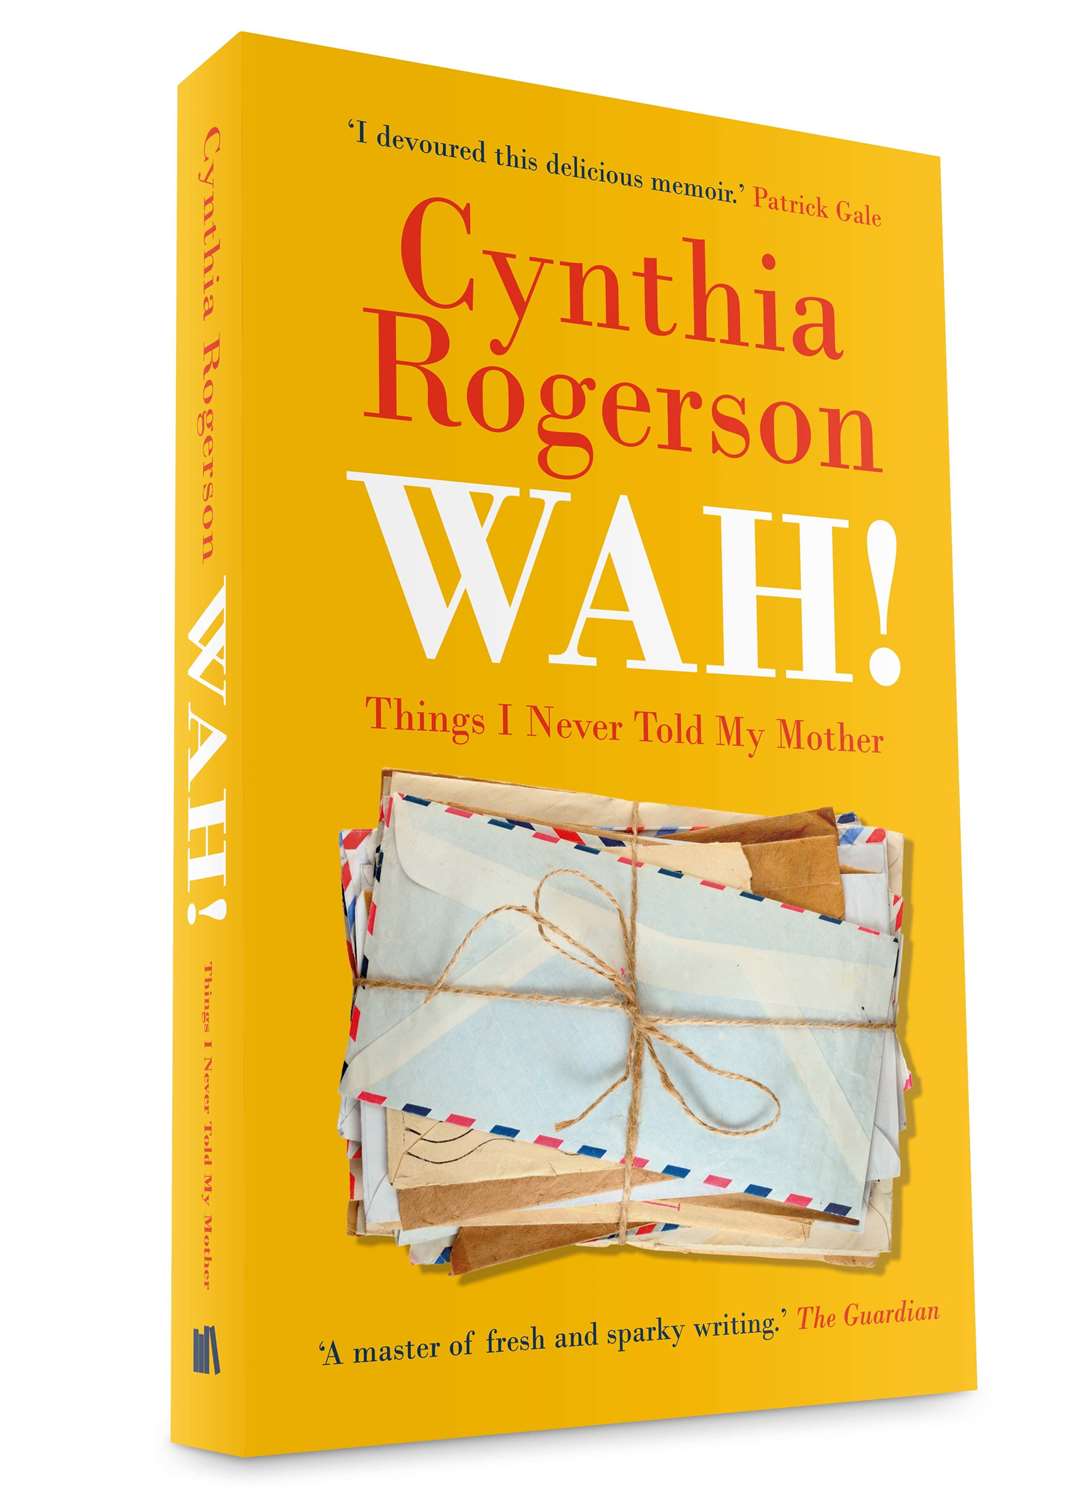 Cynthia Rogerson's new book is already garnering rave reviews.